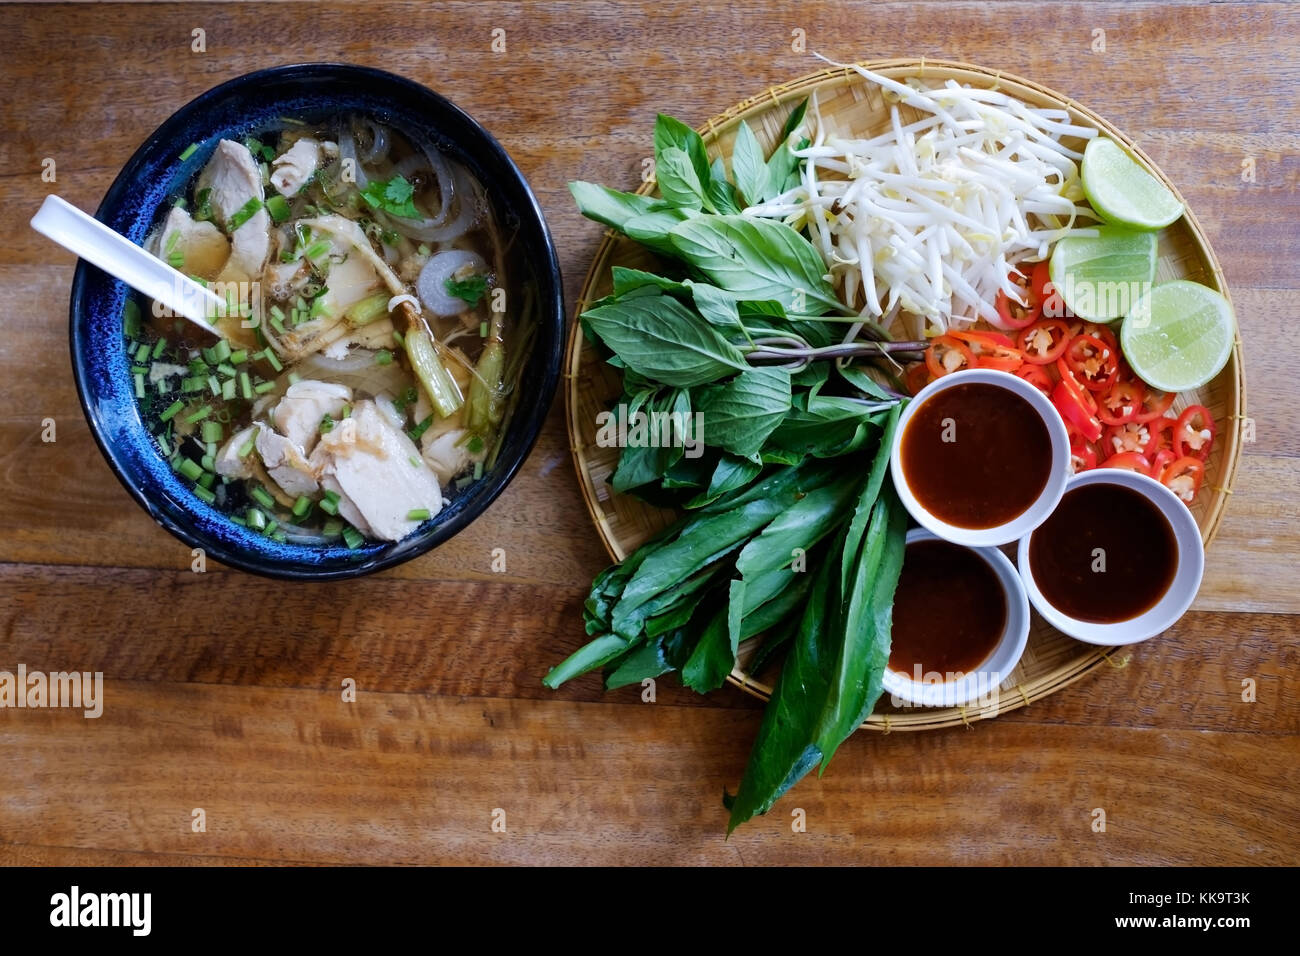 Traditional Vietnamese food. Soups, rolls and fresh herbs. Plates on a wooden surface. Stock Photo